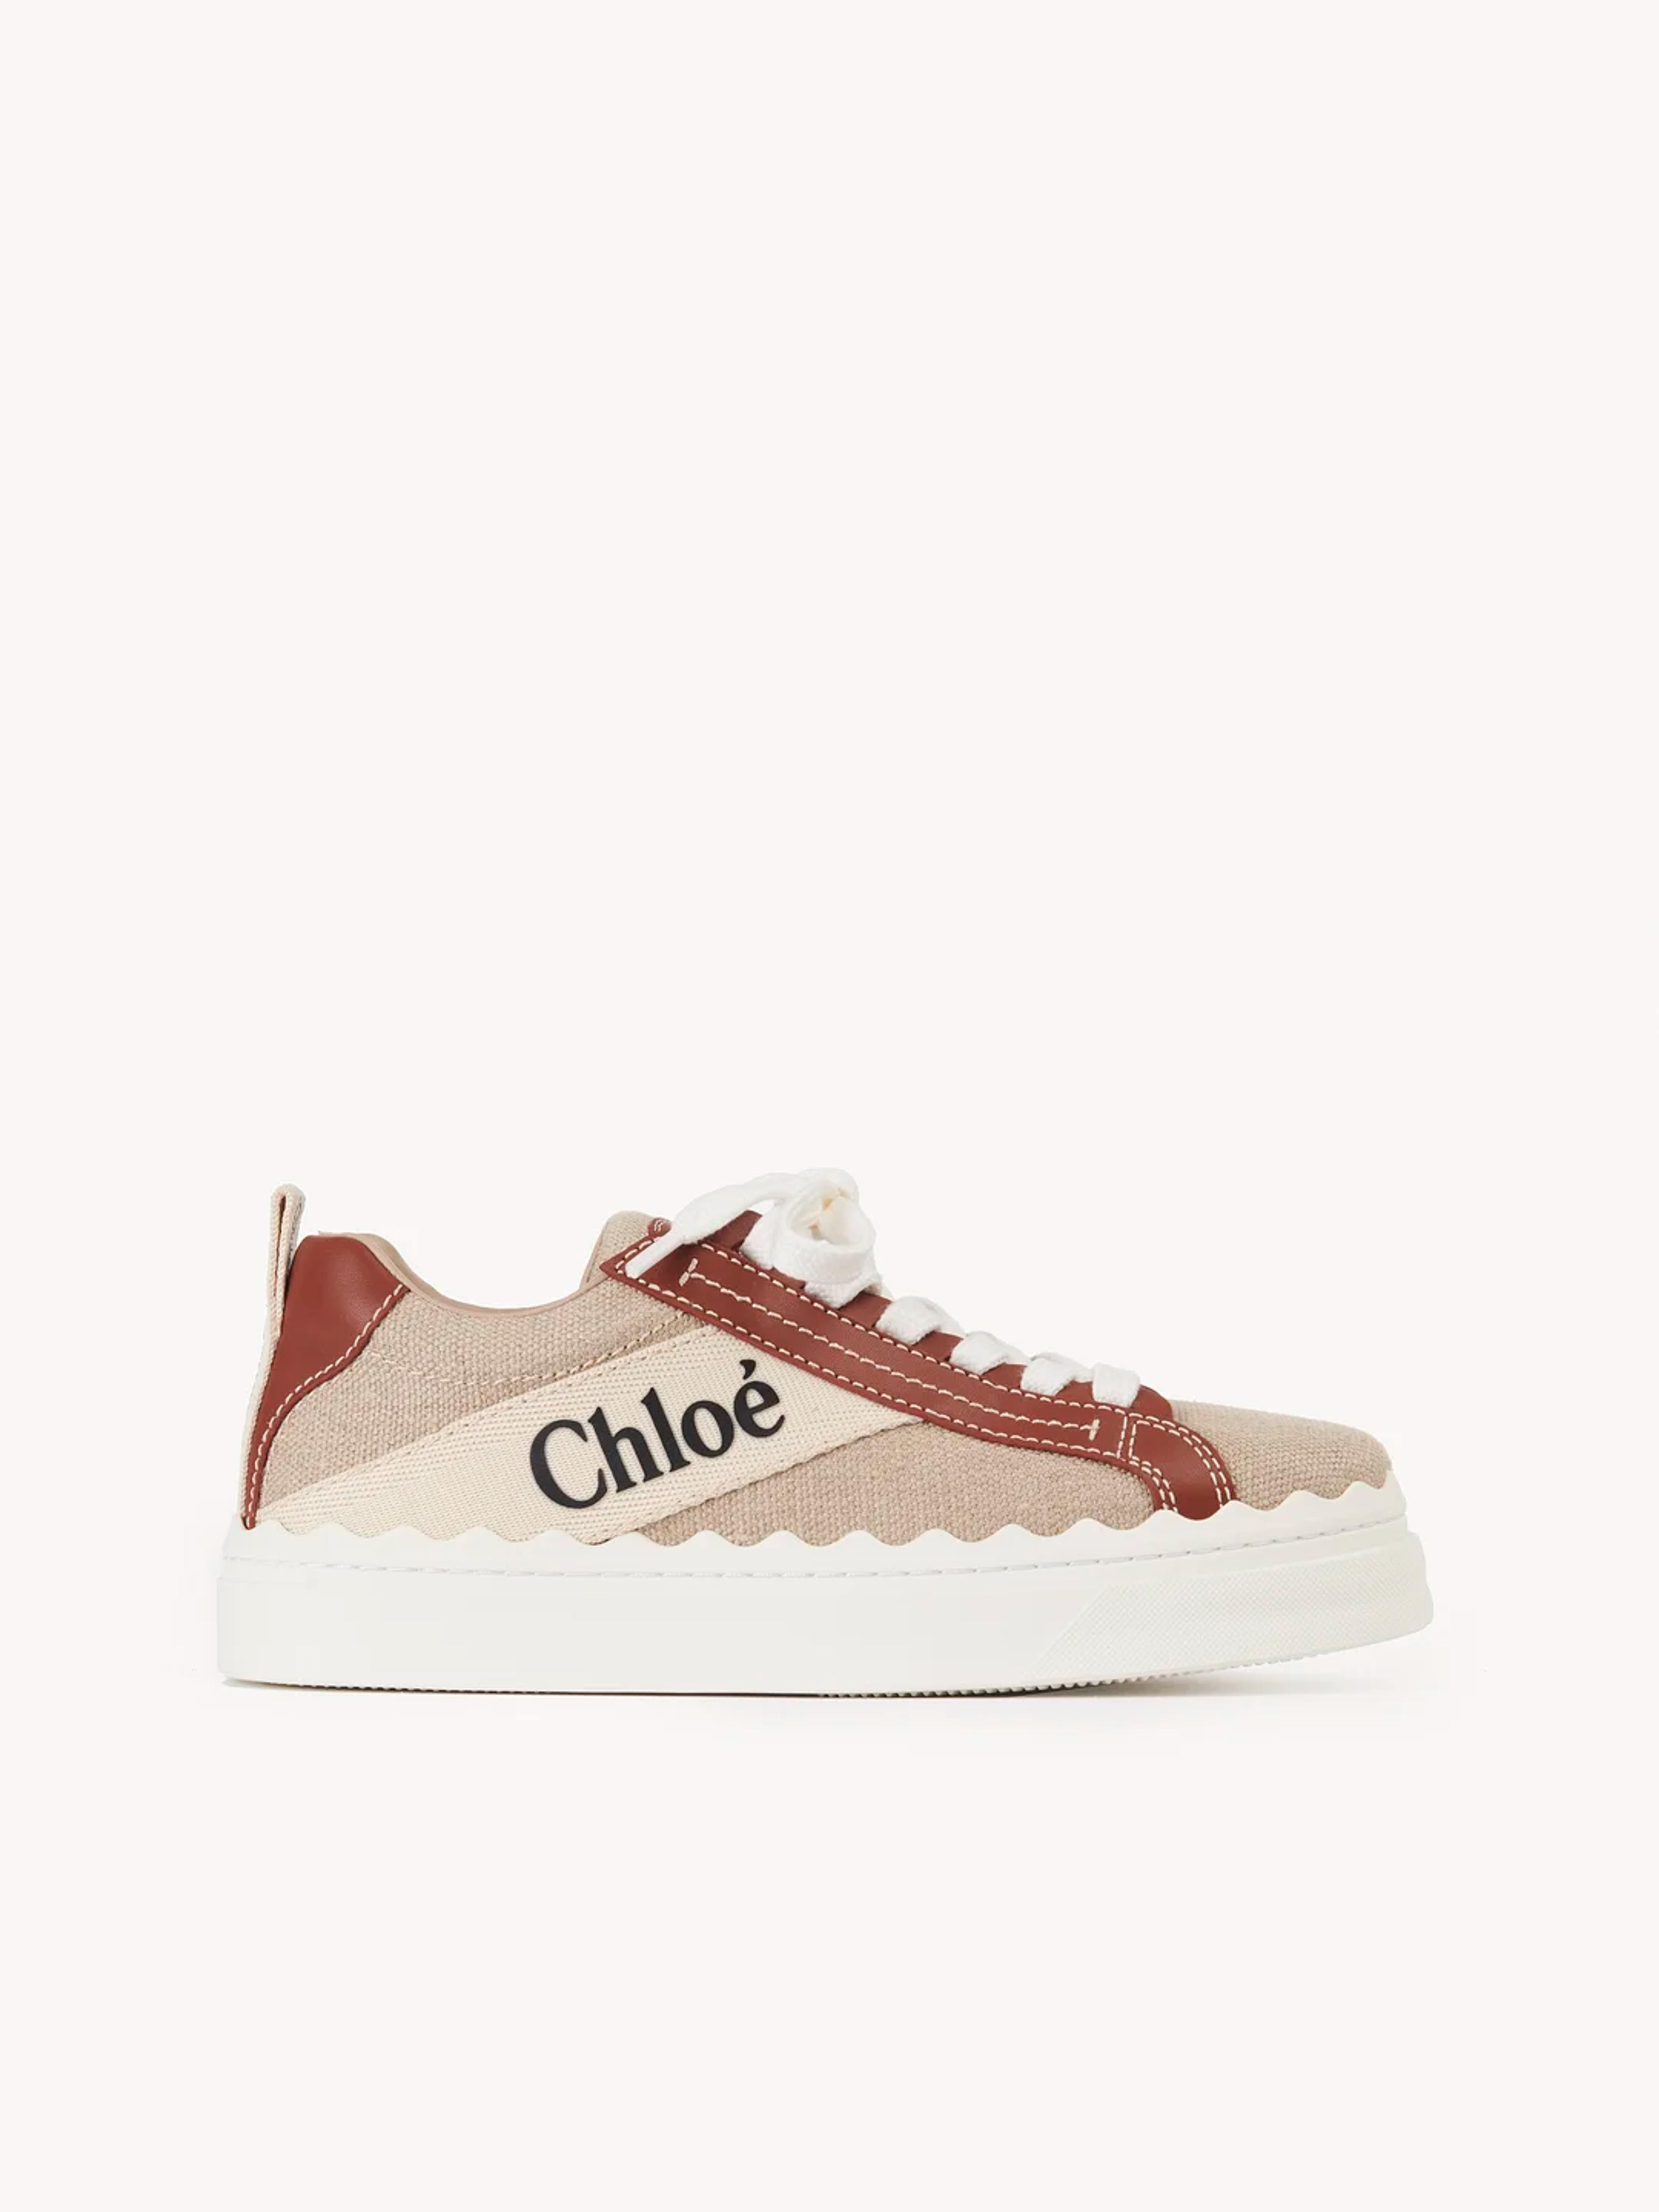 CHLOÉ- Lauren Leather and Canvas Sneakers- Woman- 41 - Beige